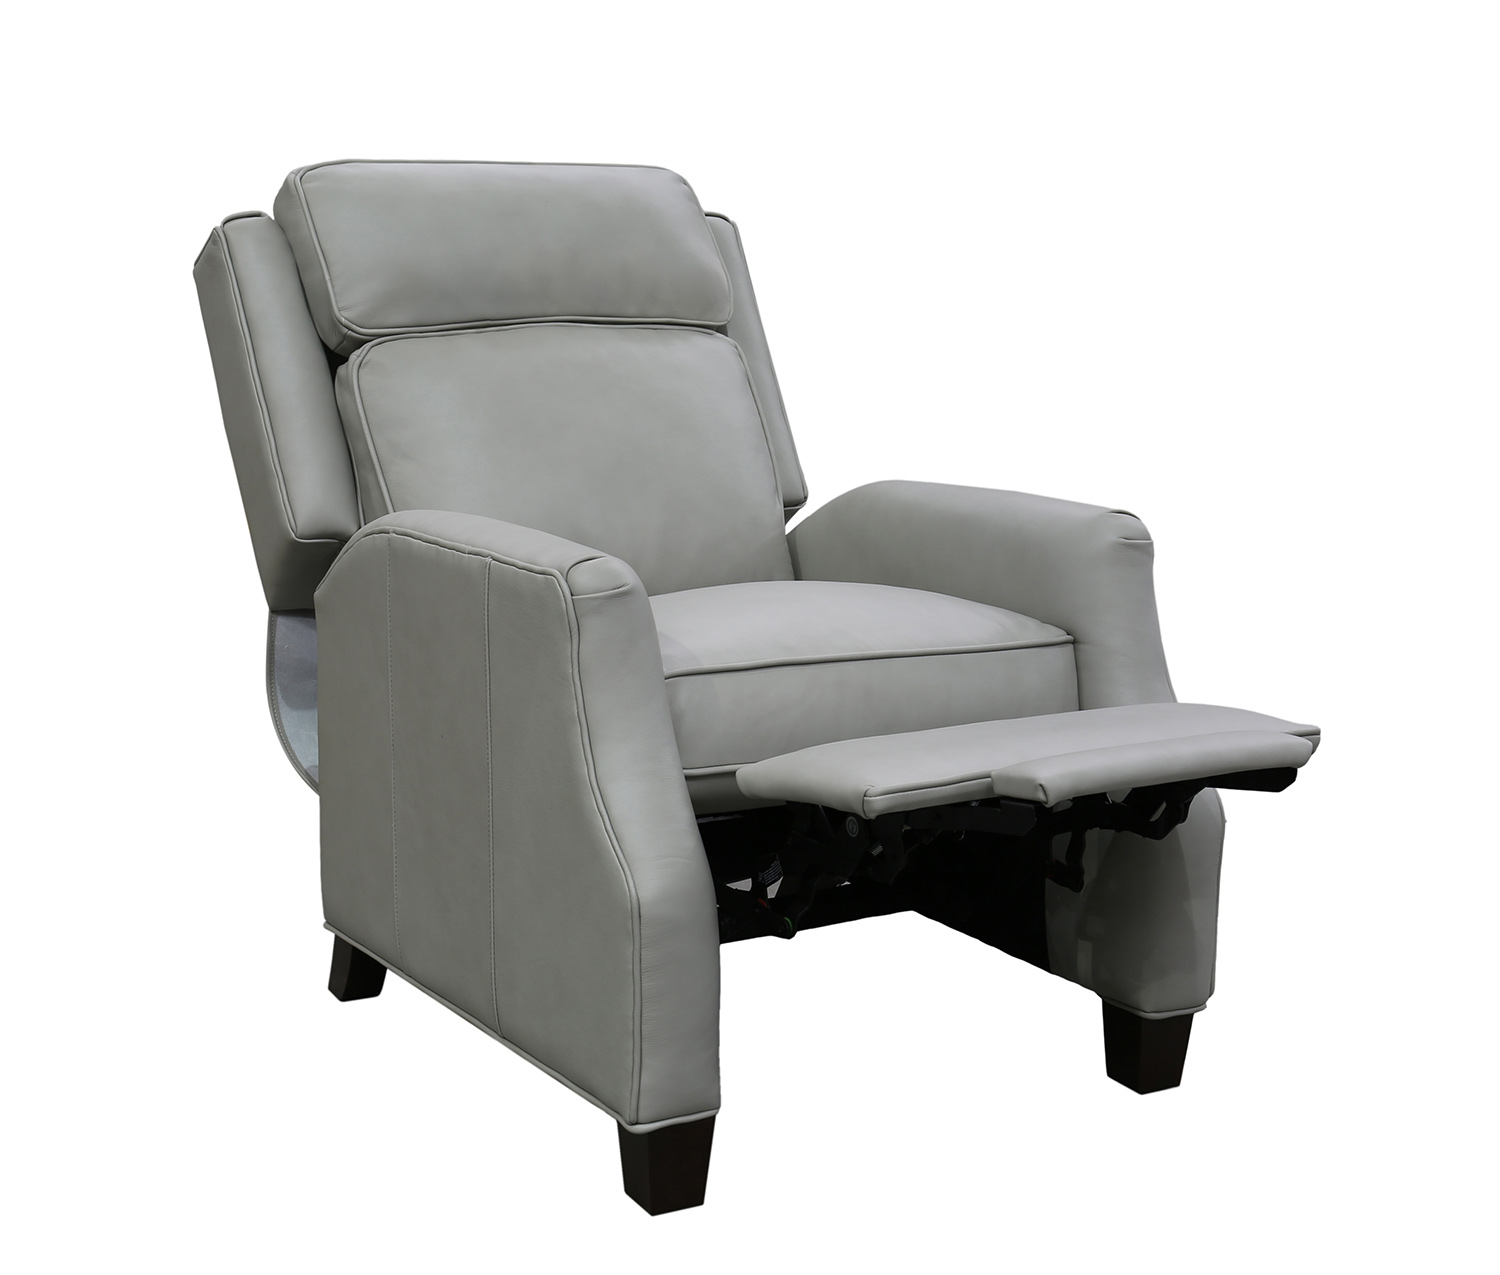 Barcalounger Nixon Recliner Chair - Wenlock Dove/all leather